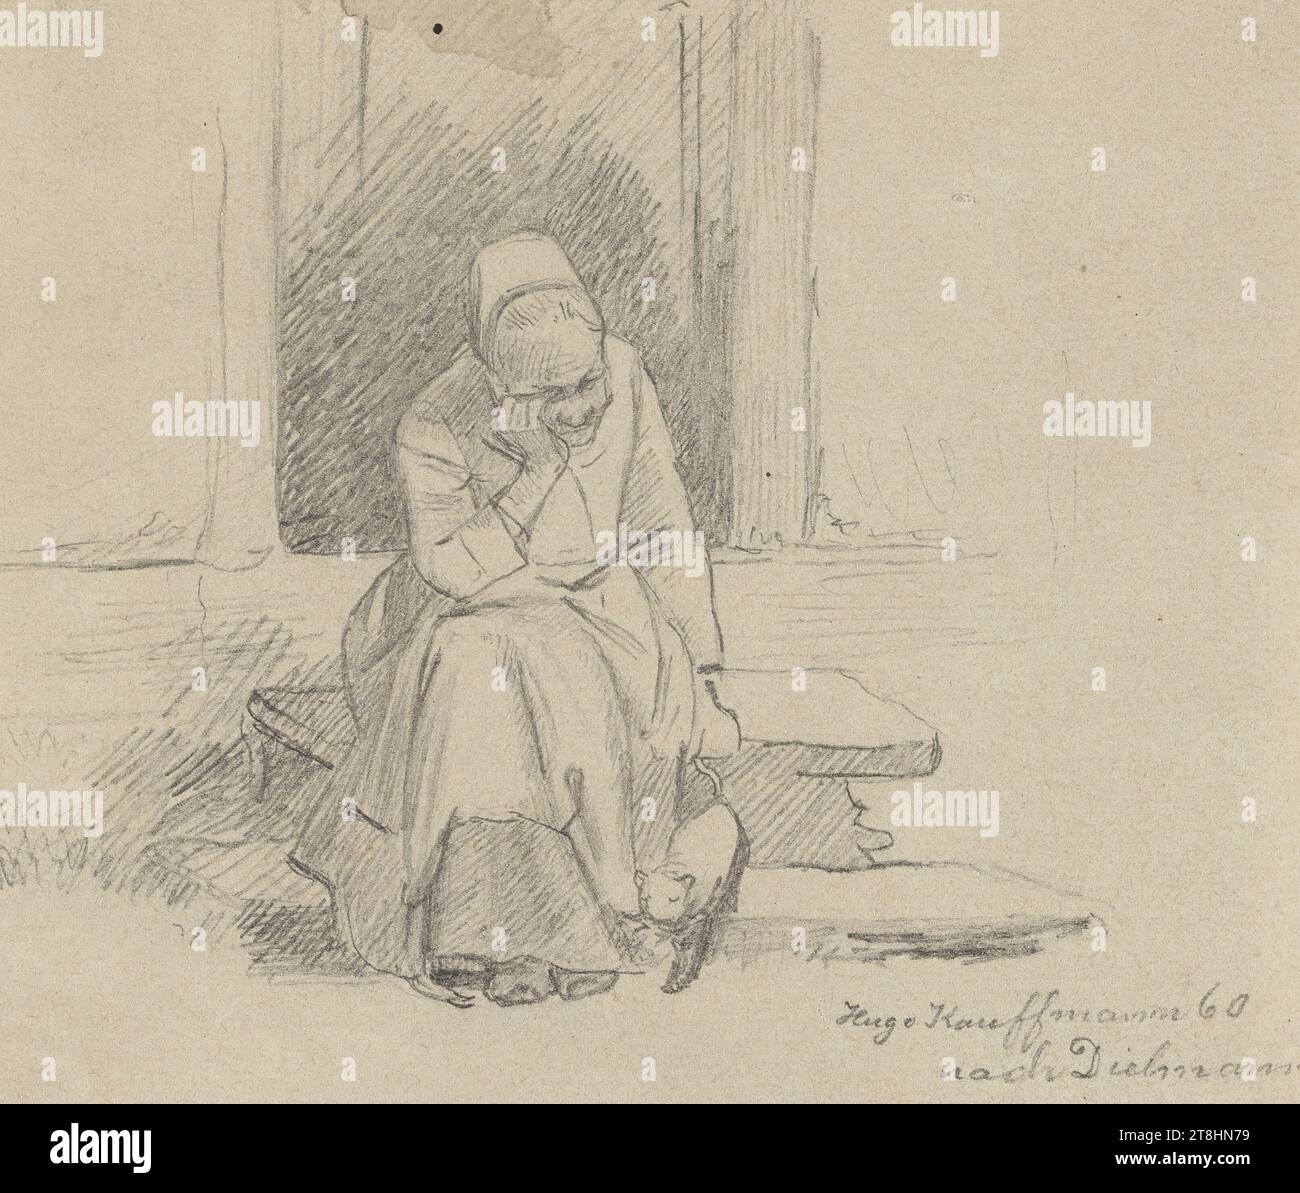 HUGO KAUFFMANN, after JAKOB ZUERCHTEGOTT DIELMANN, Old woman on the house steps, 1860, sheet, 67 x 76 mm, pencil on vellum paper, drawn on rag cardboard, Old woman on the house steps, HUGO KAUFFMANN, inventor, after JAKOBFürCHTEGOTT DIELMANN, 19TH CENTURY, DRAWING, pencil on vellum paper, drawn on rag cardboard, GRAPHITE-CLAY MIXTURE, VELVET PAPER, PENCIL DRAWING, GERMAN, COPY, Signed, dated and inscribed lower right, in pencil, Hugo Kauffmann 60 / after Dielmann Stock Photo